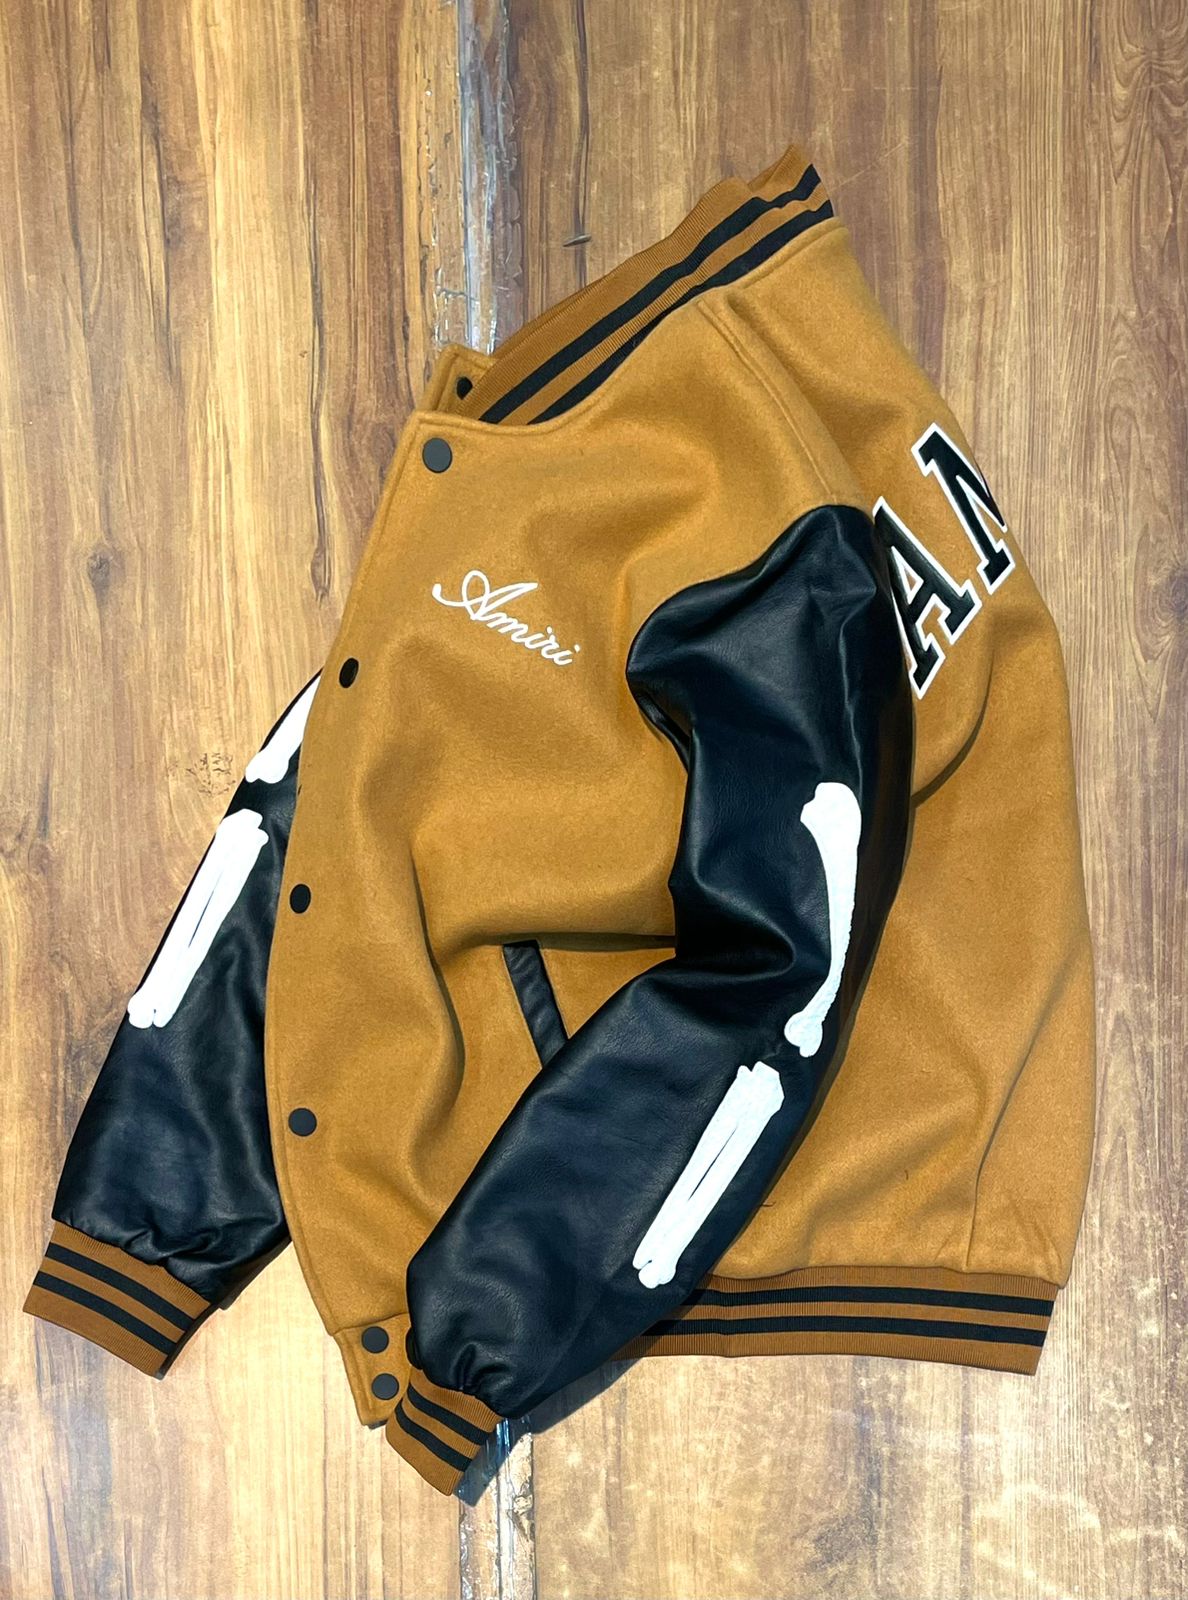 LUXURY WINTER HIGH END QUALITY VARSITY JACKETS FOR MEN